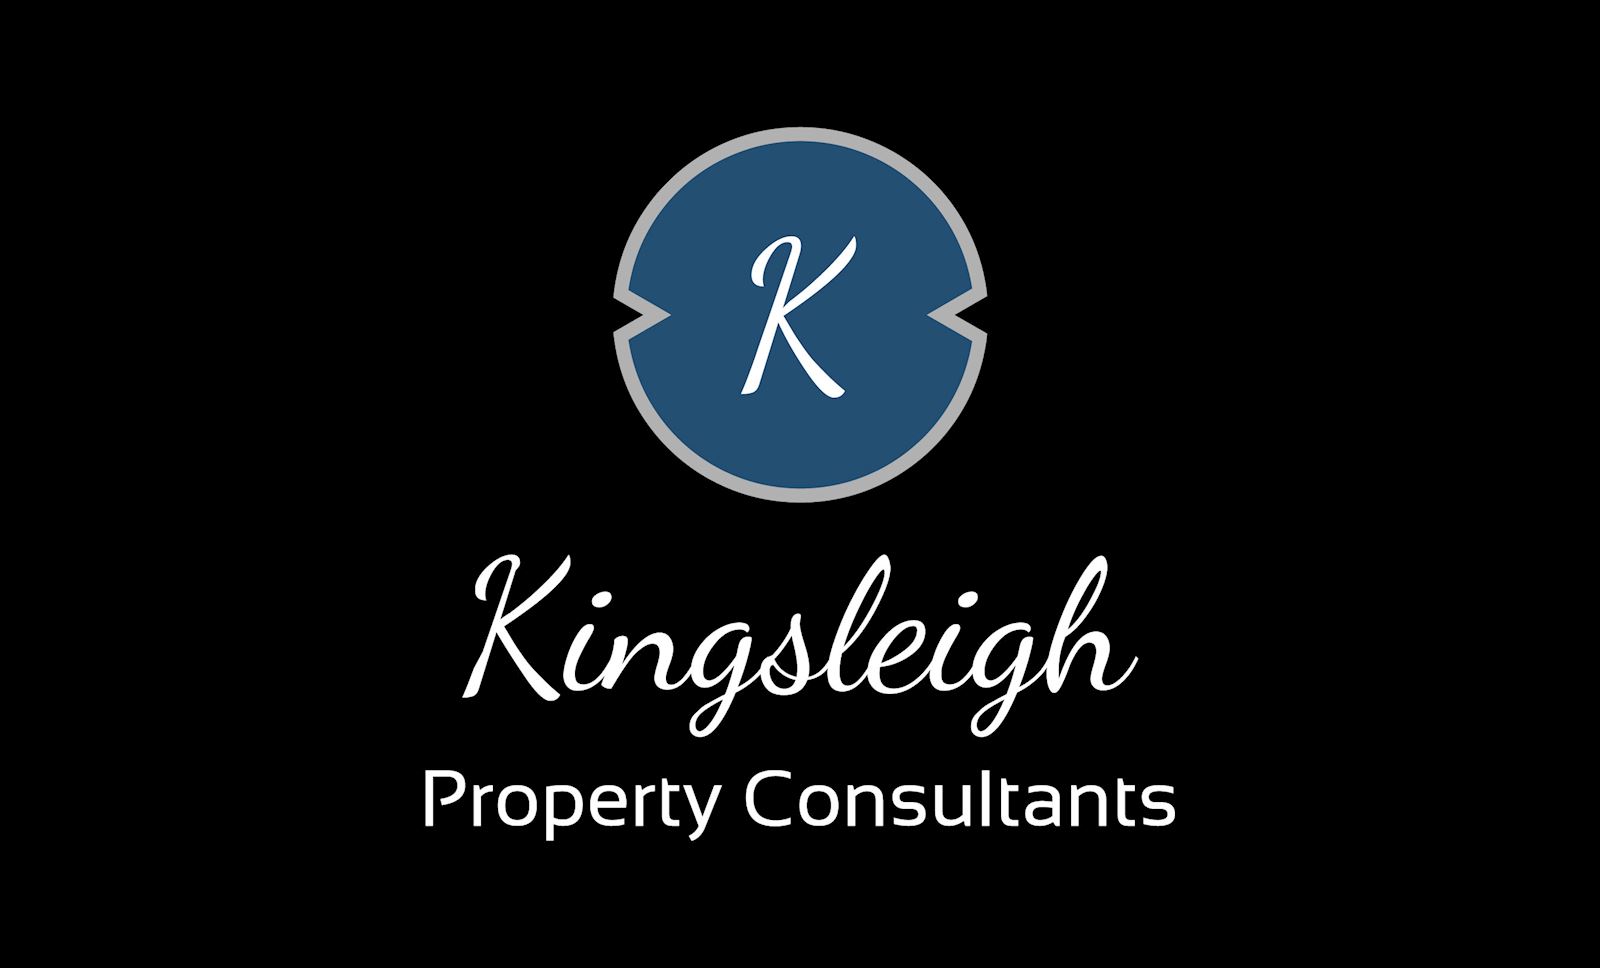 Kingsleigh property consultants